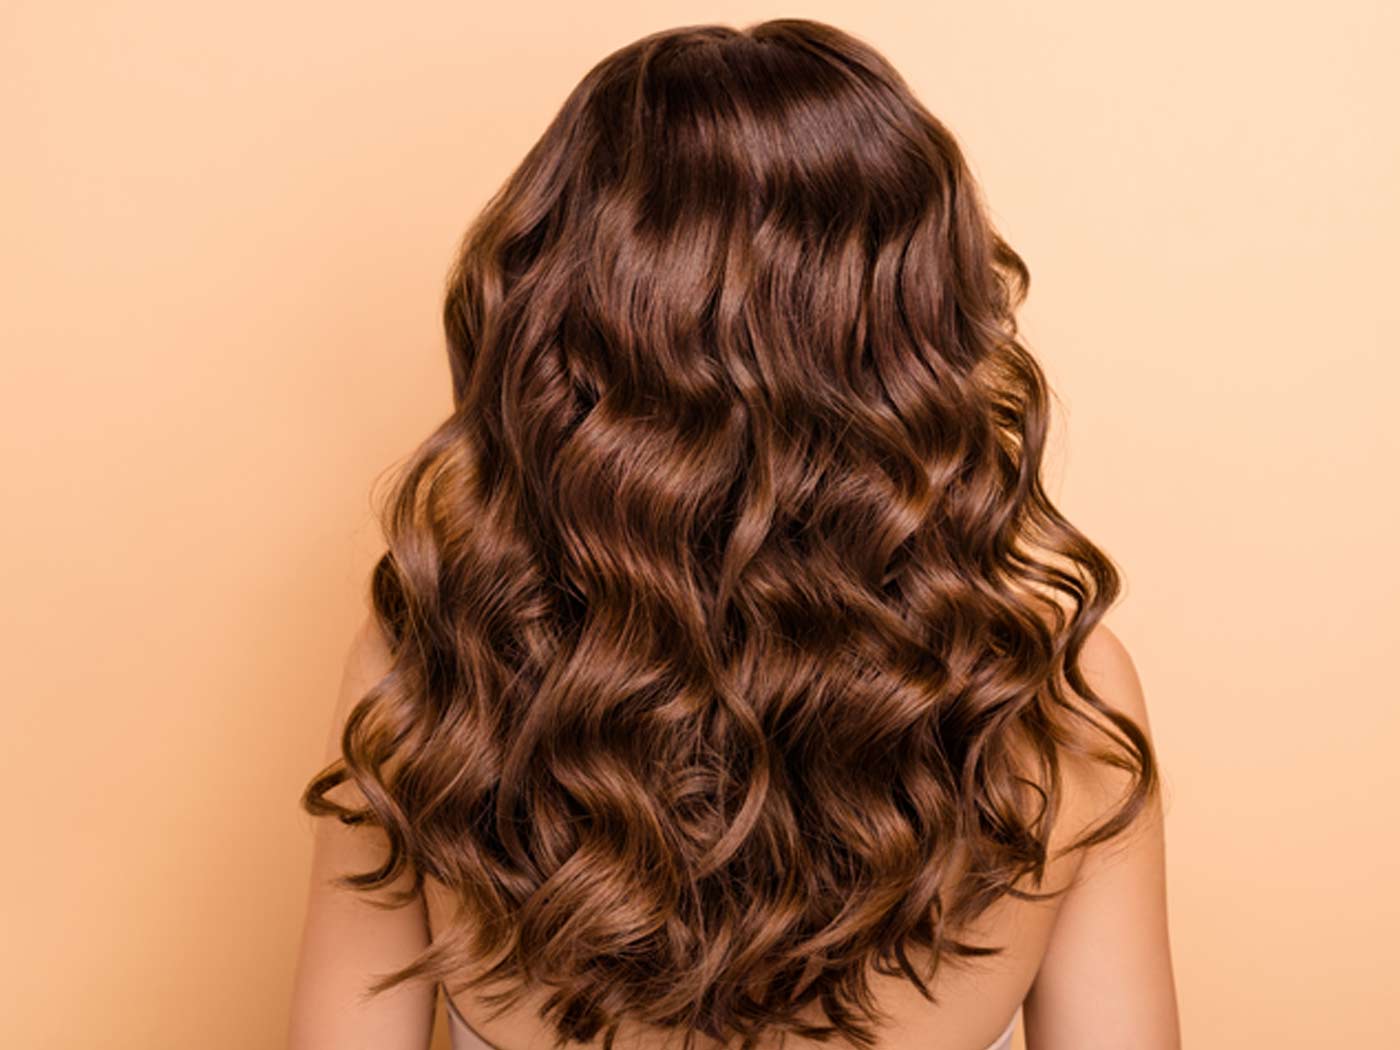 3. The Best Hair Products for Long, Healthy Hair - wide 3